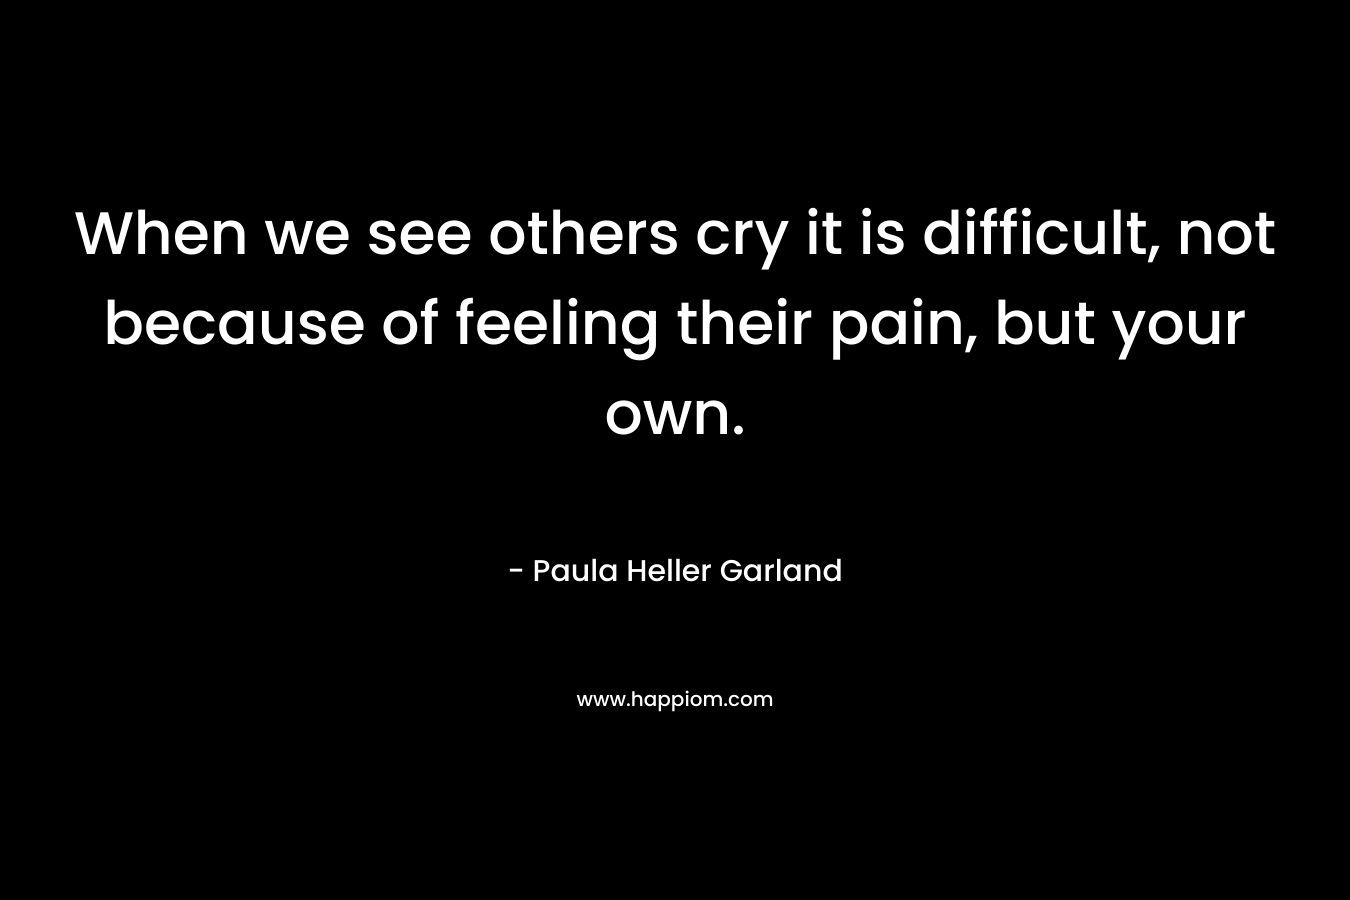 When we see others cry it is difficult, not because of feeling their pain, but your own. – Paula Heller Garland